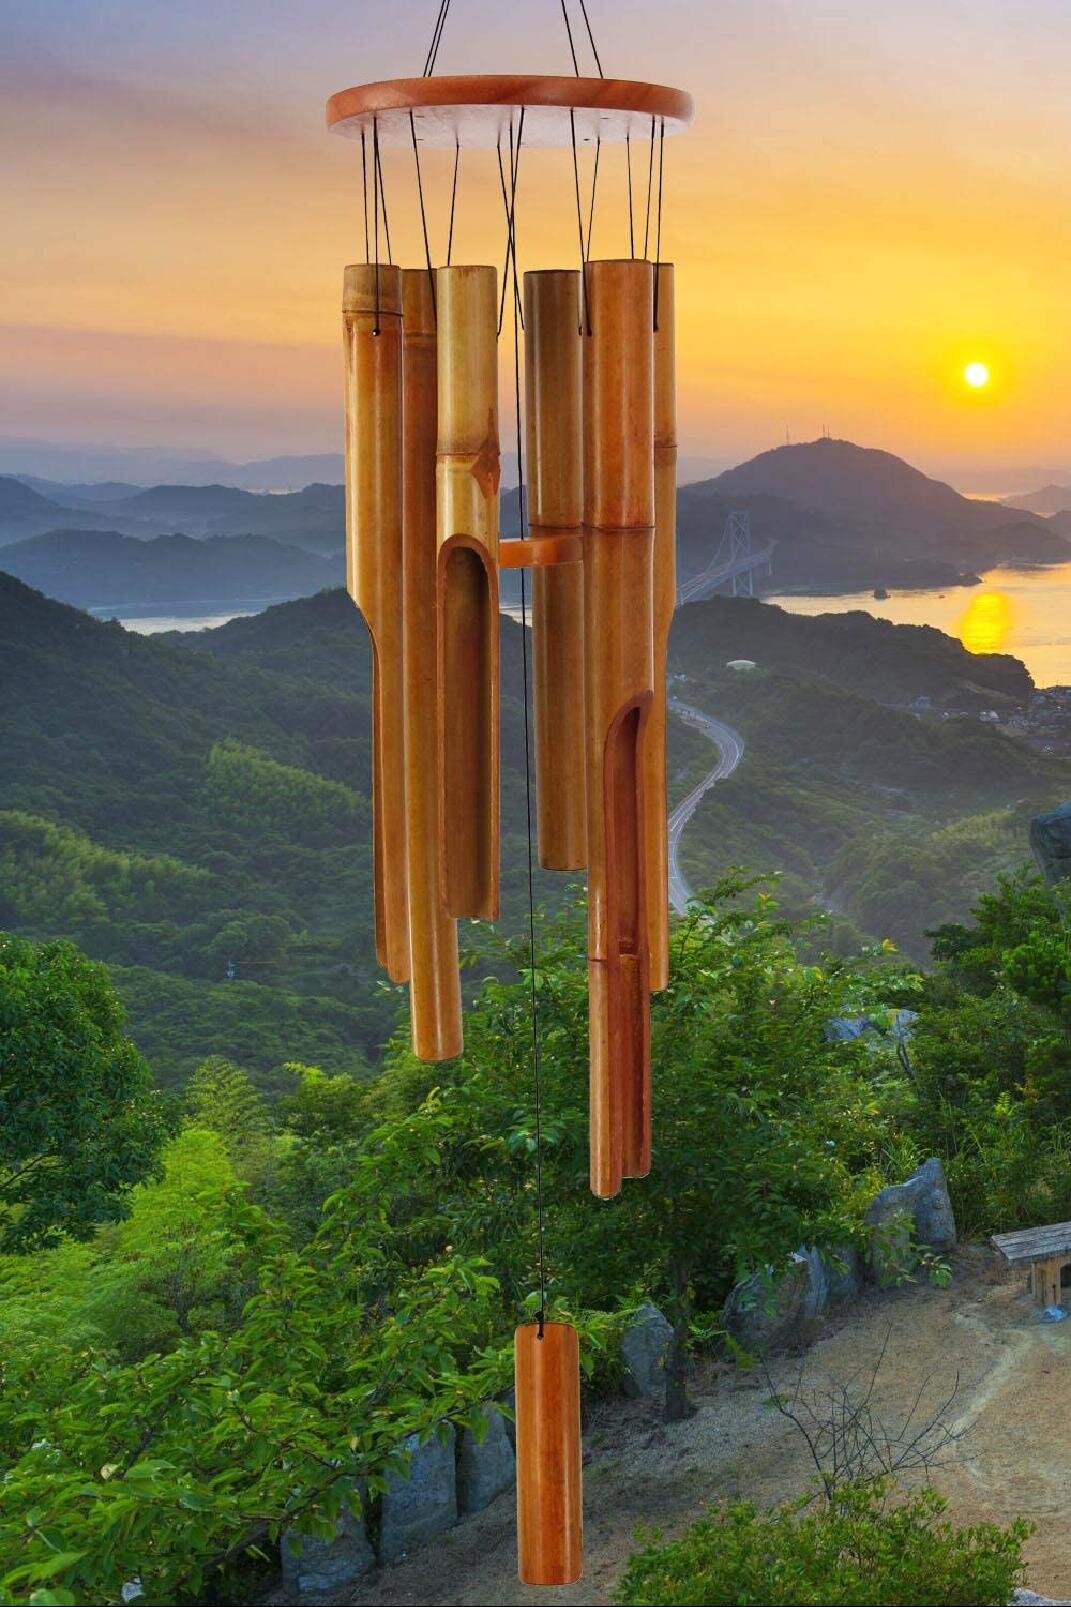 Bamboo Wind Chime Premium Wooden Indoor or Outdoor Wind Chime for Home Garden Porch Yard or Balcony Decor Patio 